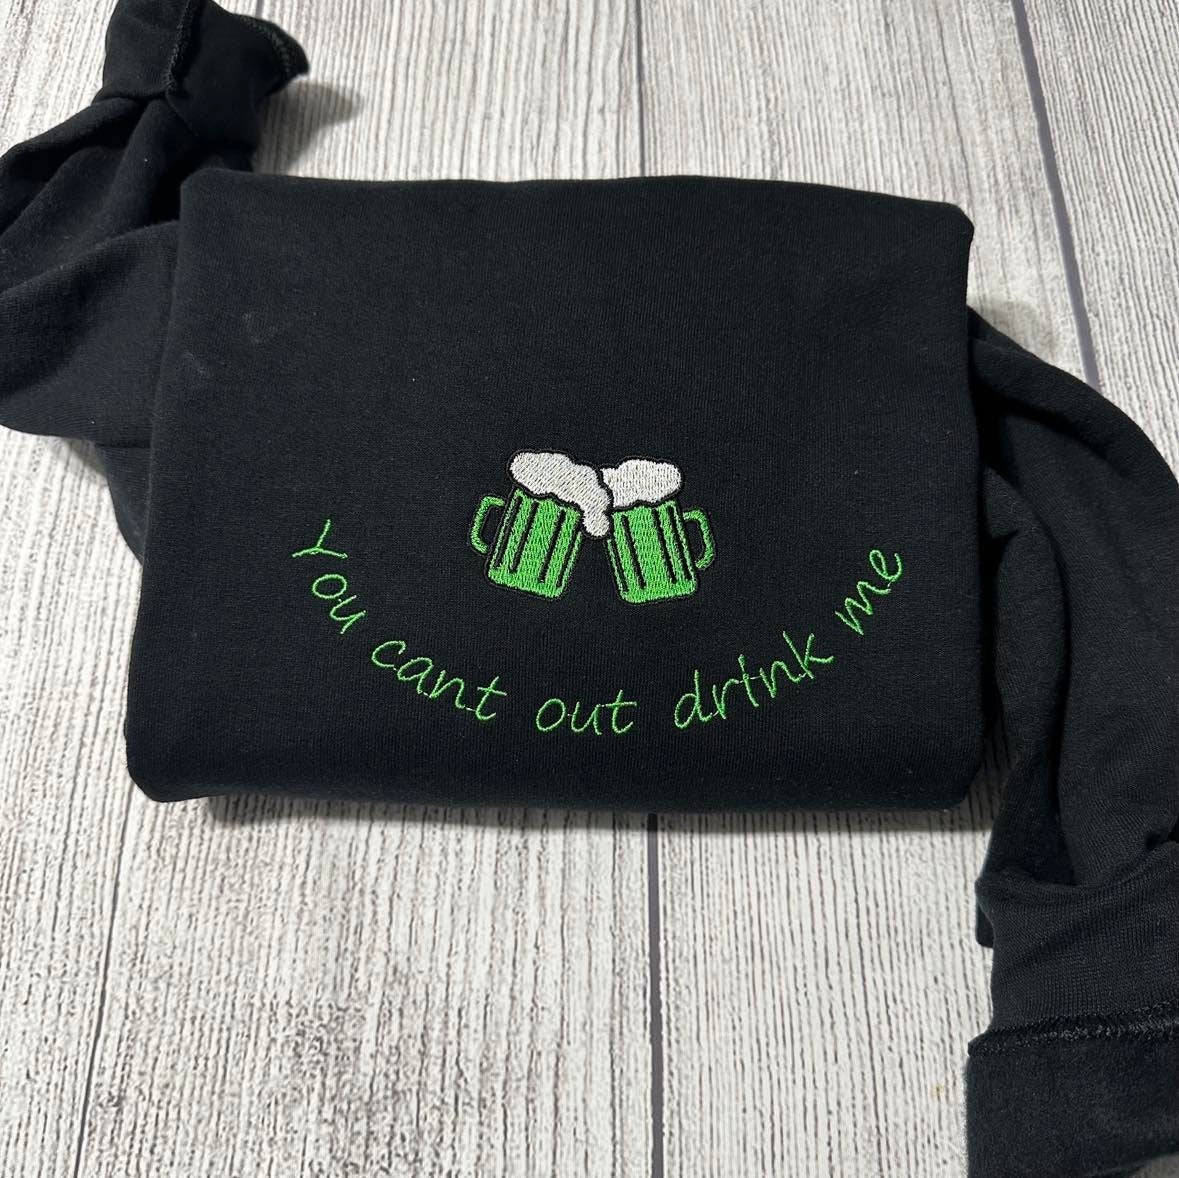 Patrick's day Embroidered Sweatshirt; you can't out drink me  Sweater; Custom St. Patrick Embroidered sweatshirt. St Patricks day